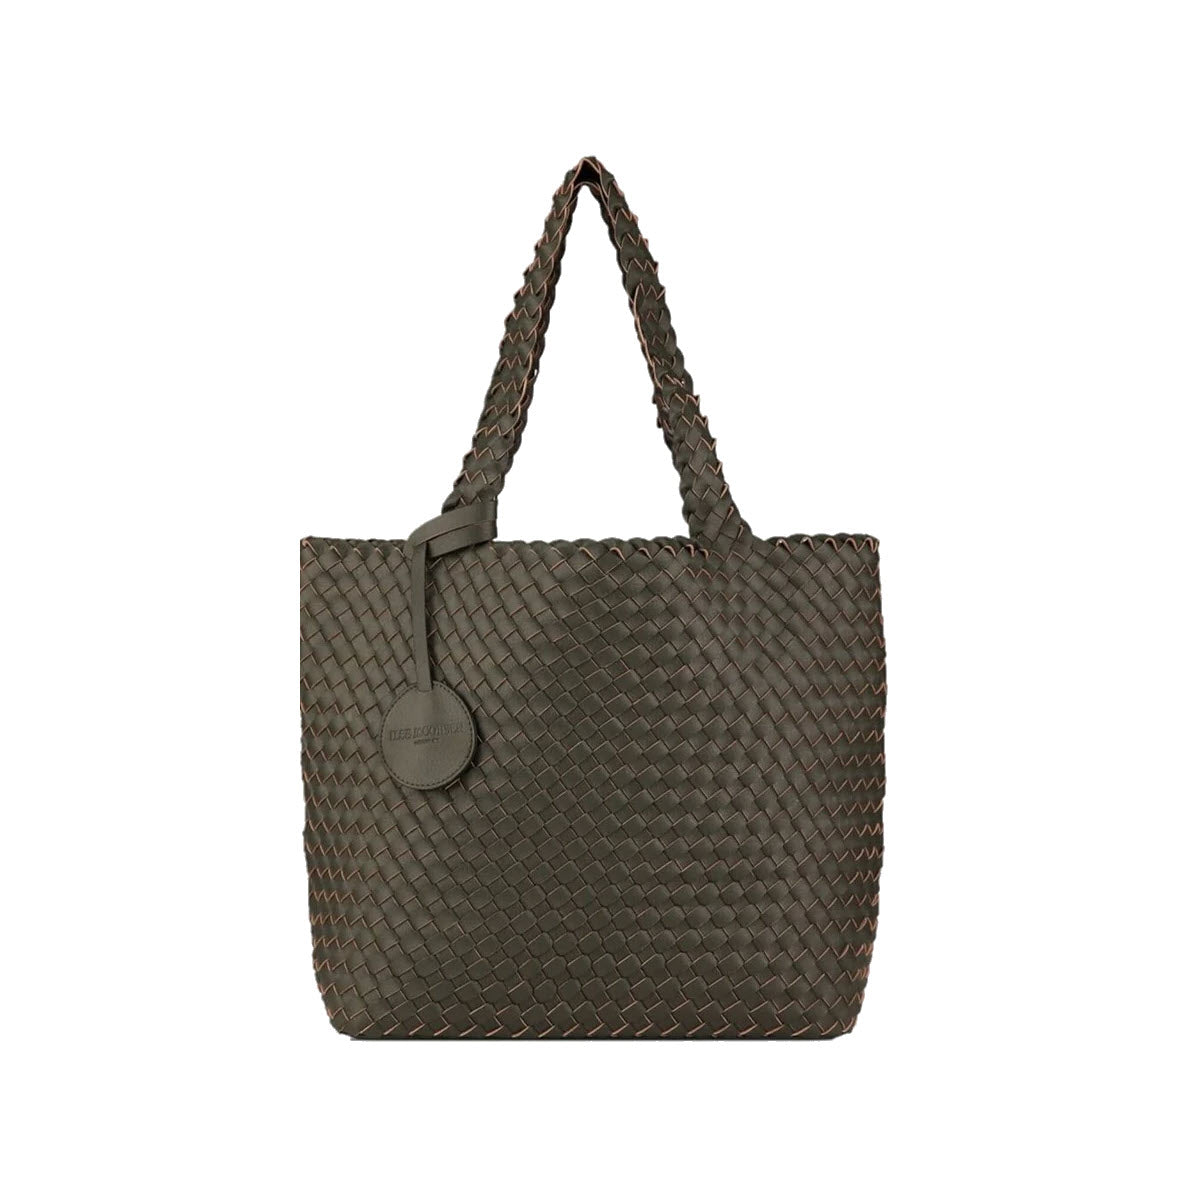 A Ilse Jacobsen woven tote dark shadow/gunmetal bag with a textured surface and a circular logo tag, displayed against a white background.